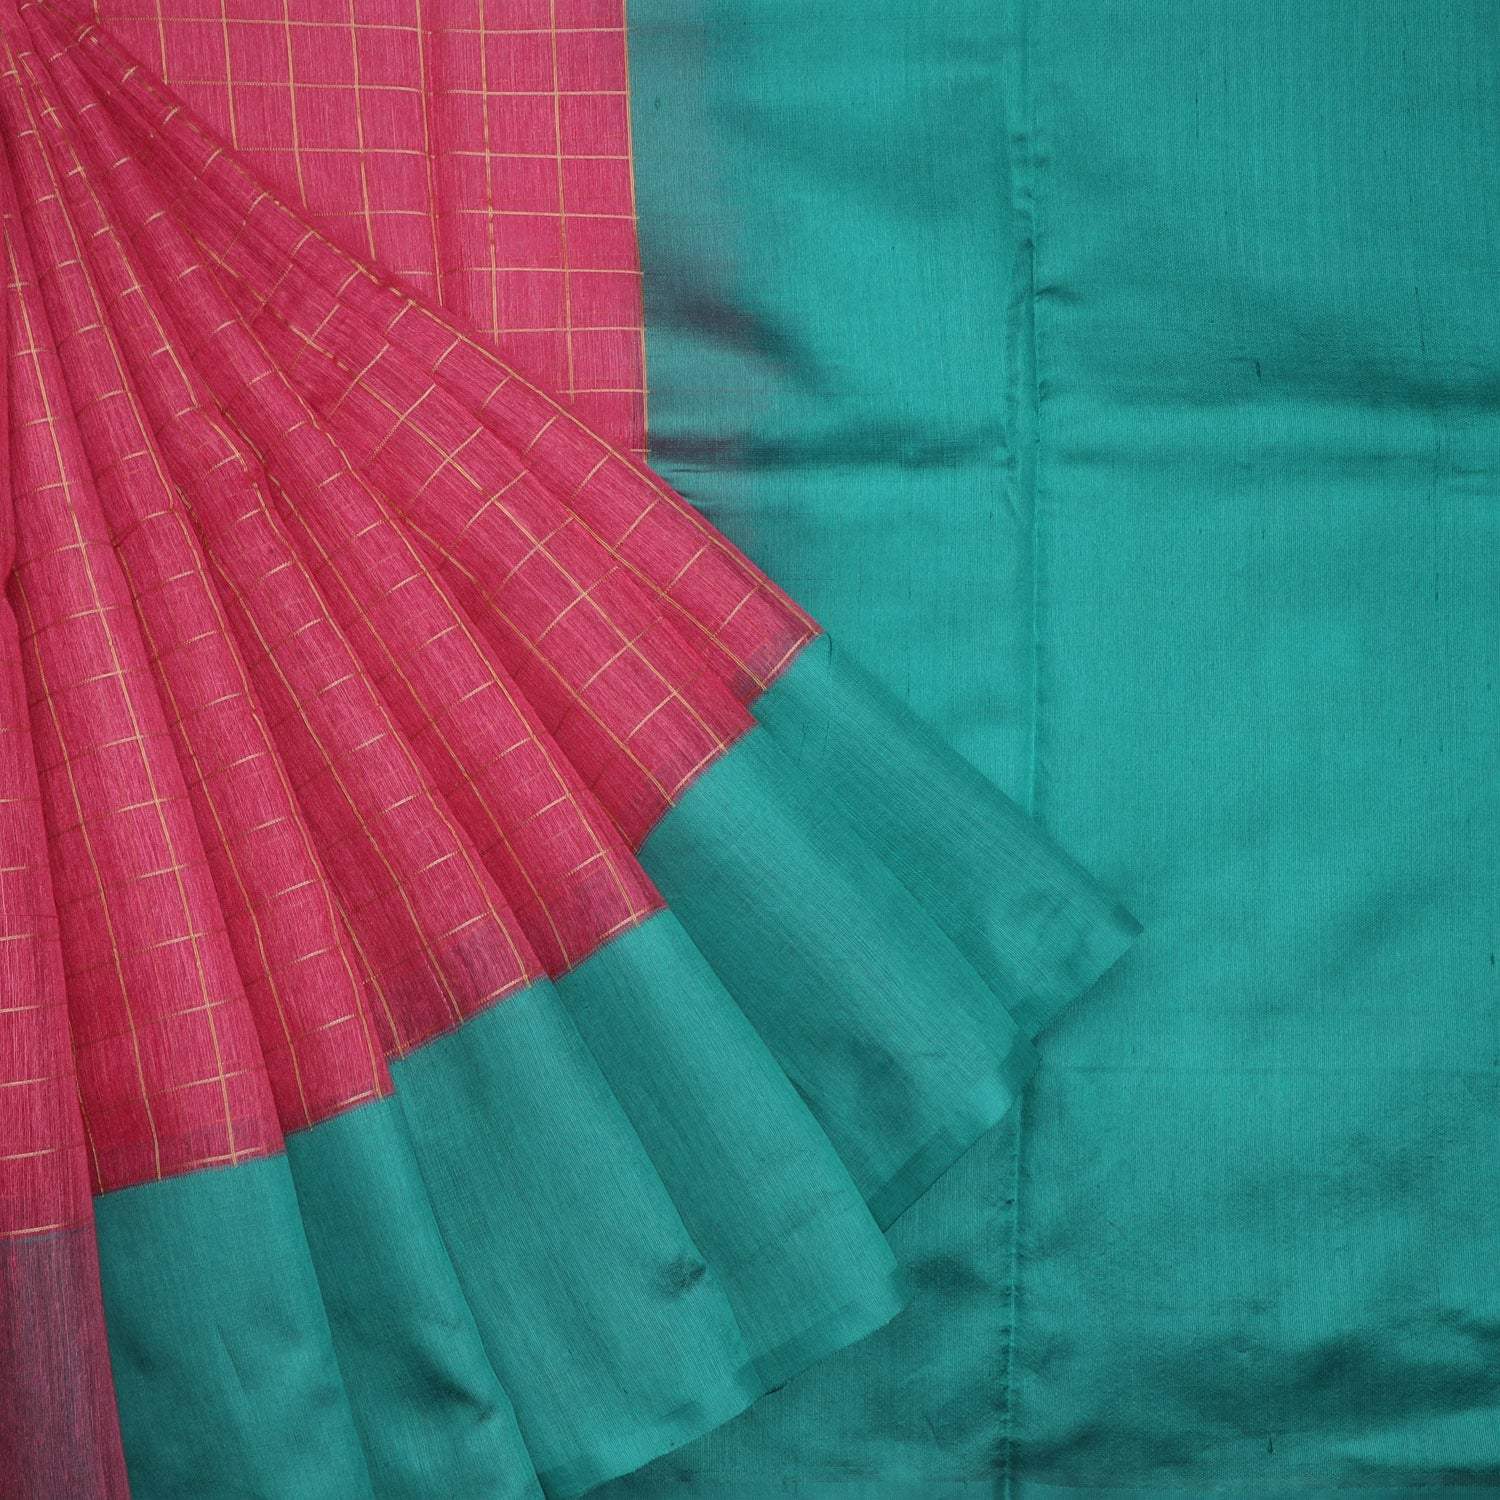 Pale Red Matka Tussar Saree With Checks - Singhania's